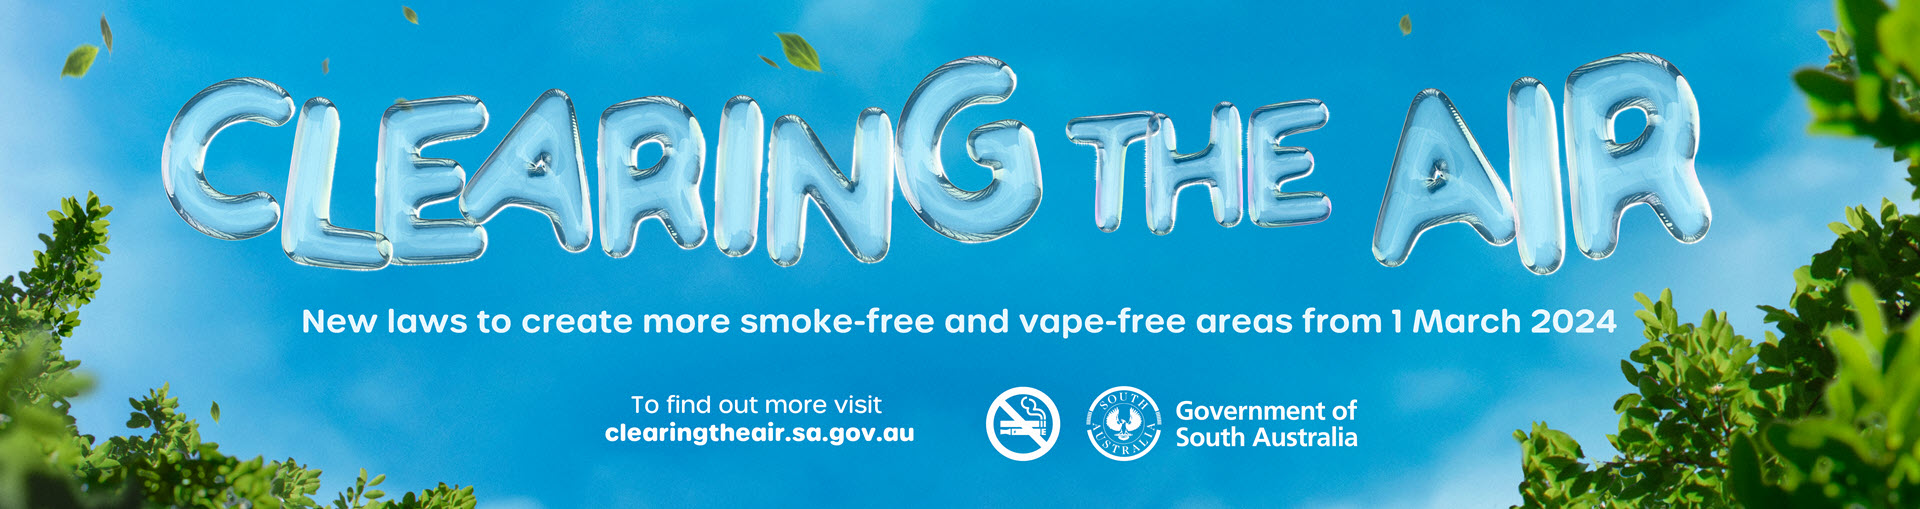 Clearing the air campaign banner image. Smoke-free also means vape-free.